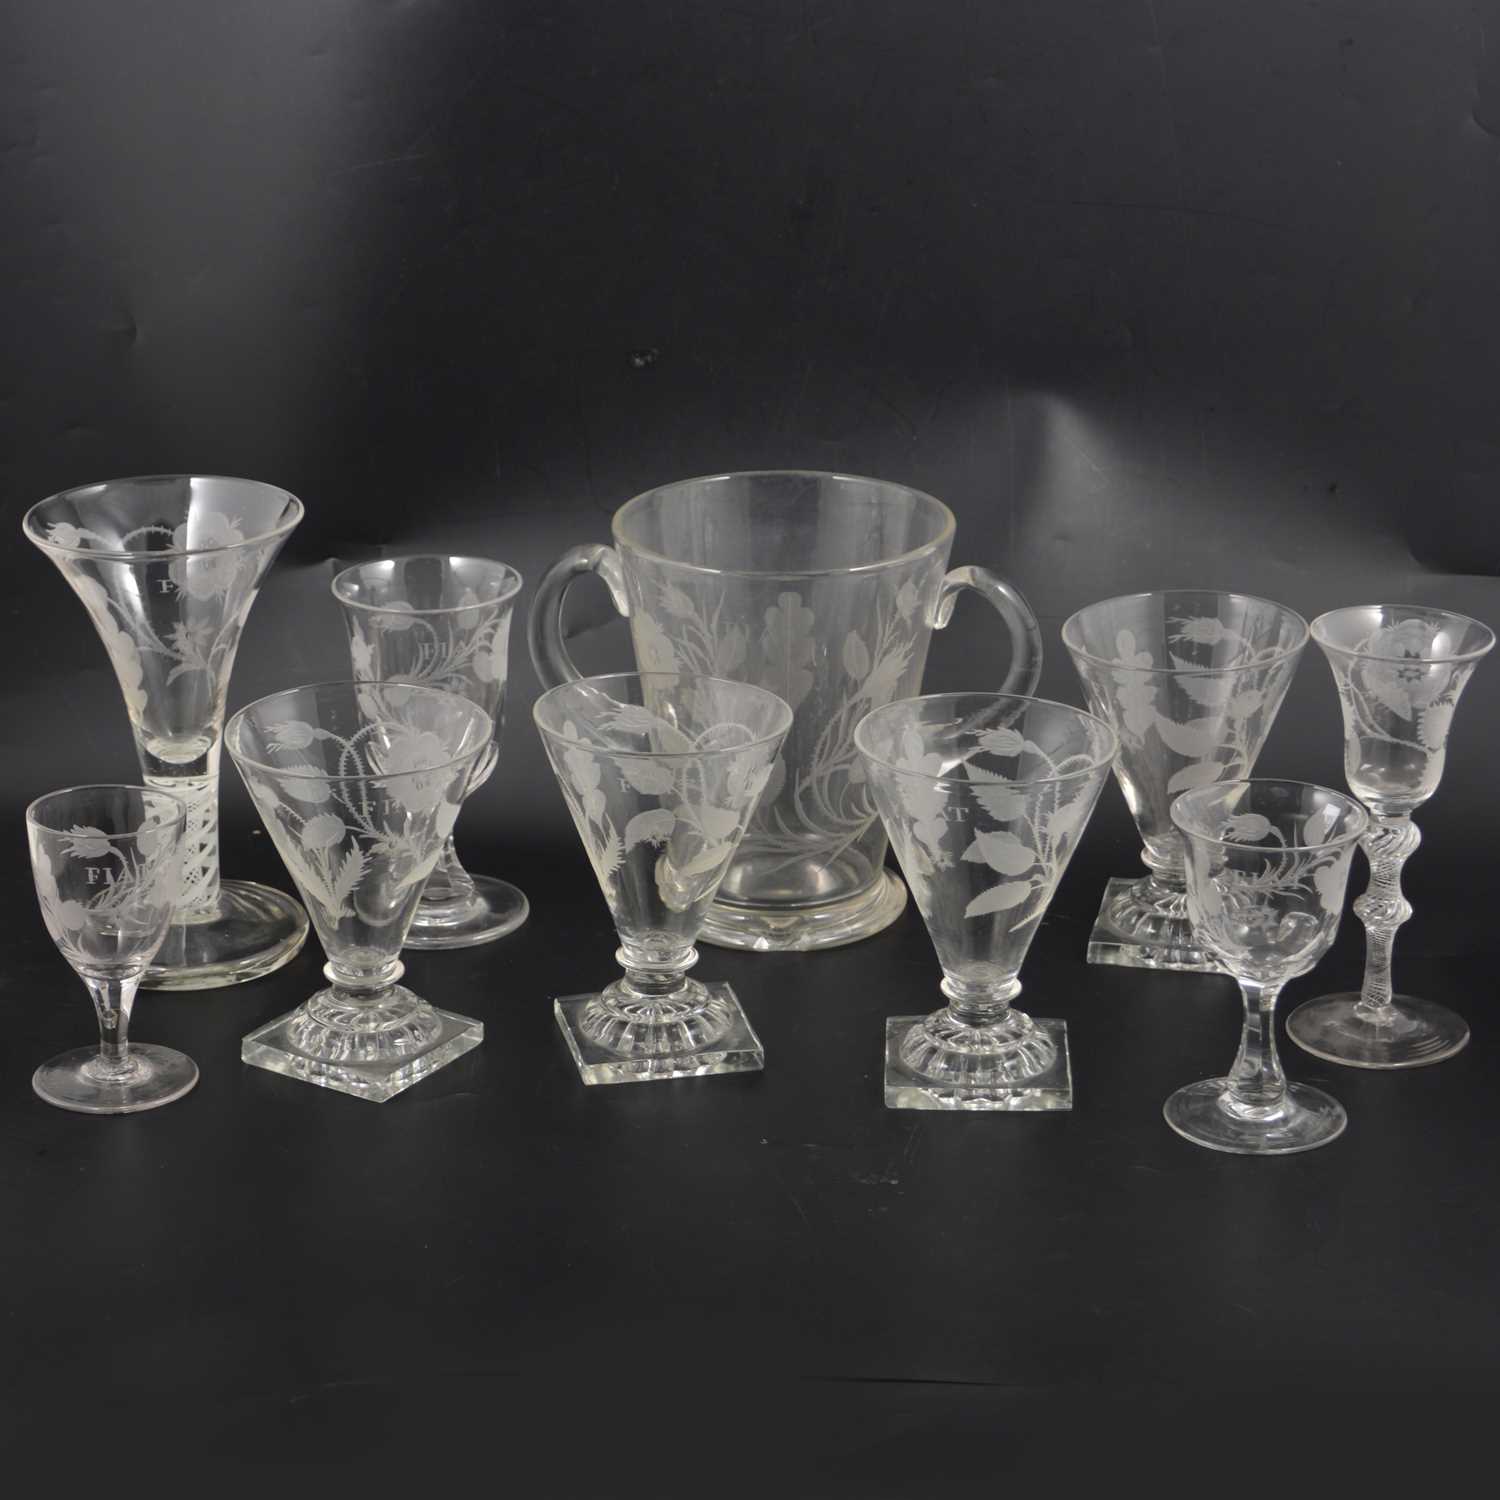 Lot 30 - A small collection of Jacobean inspired table glassware, 20th century.